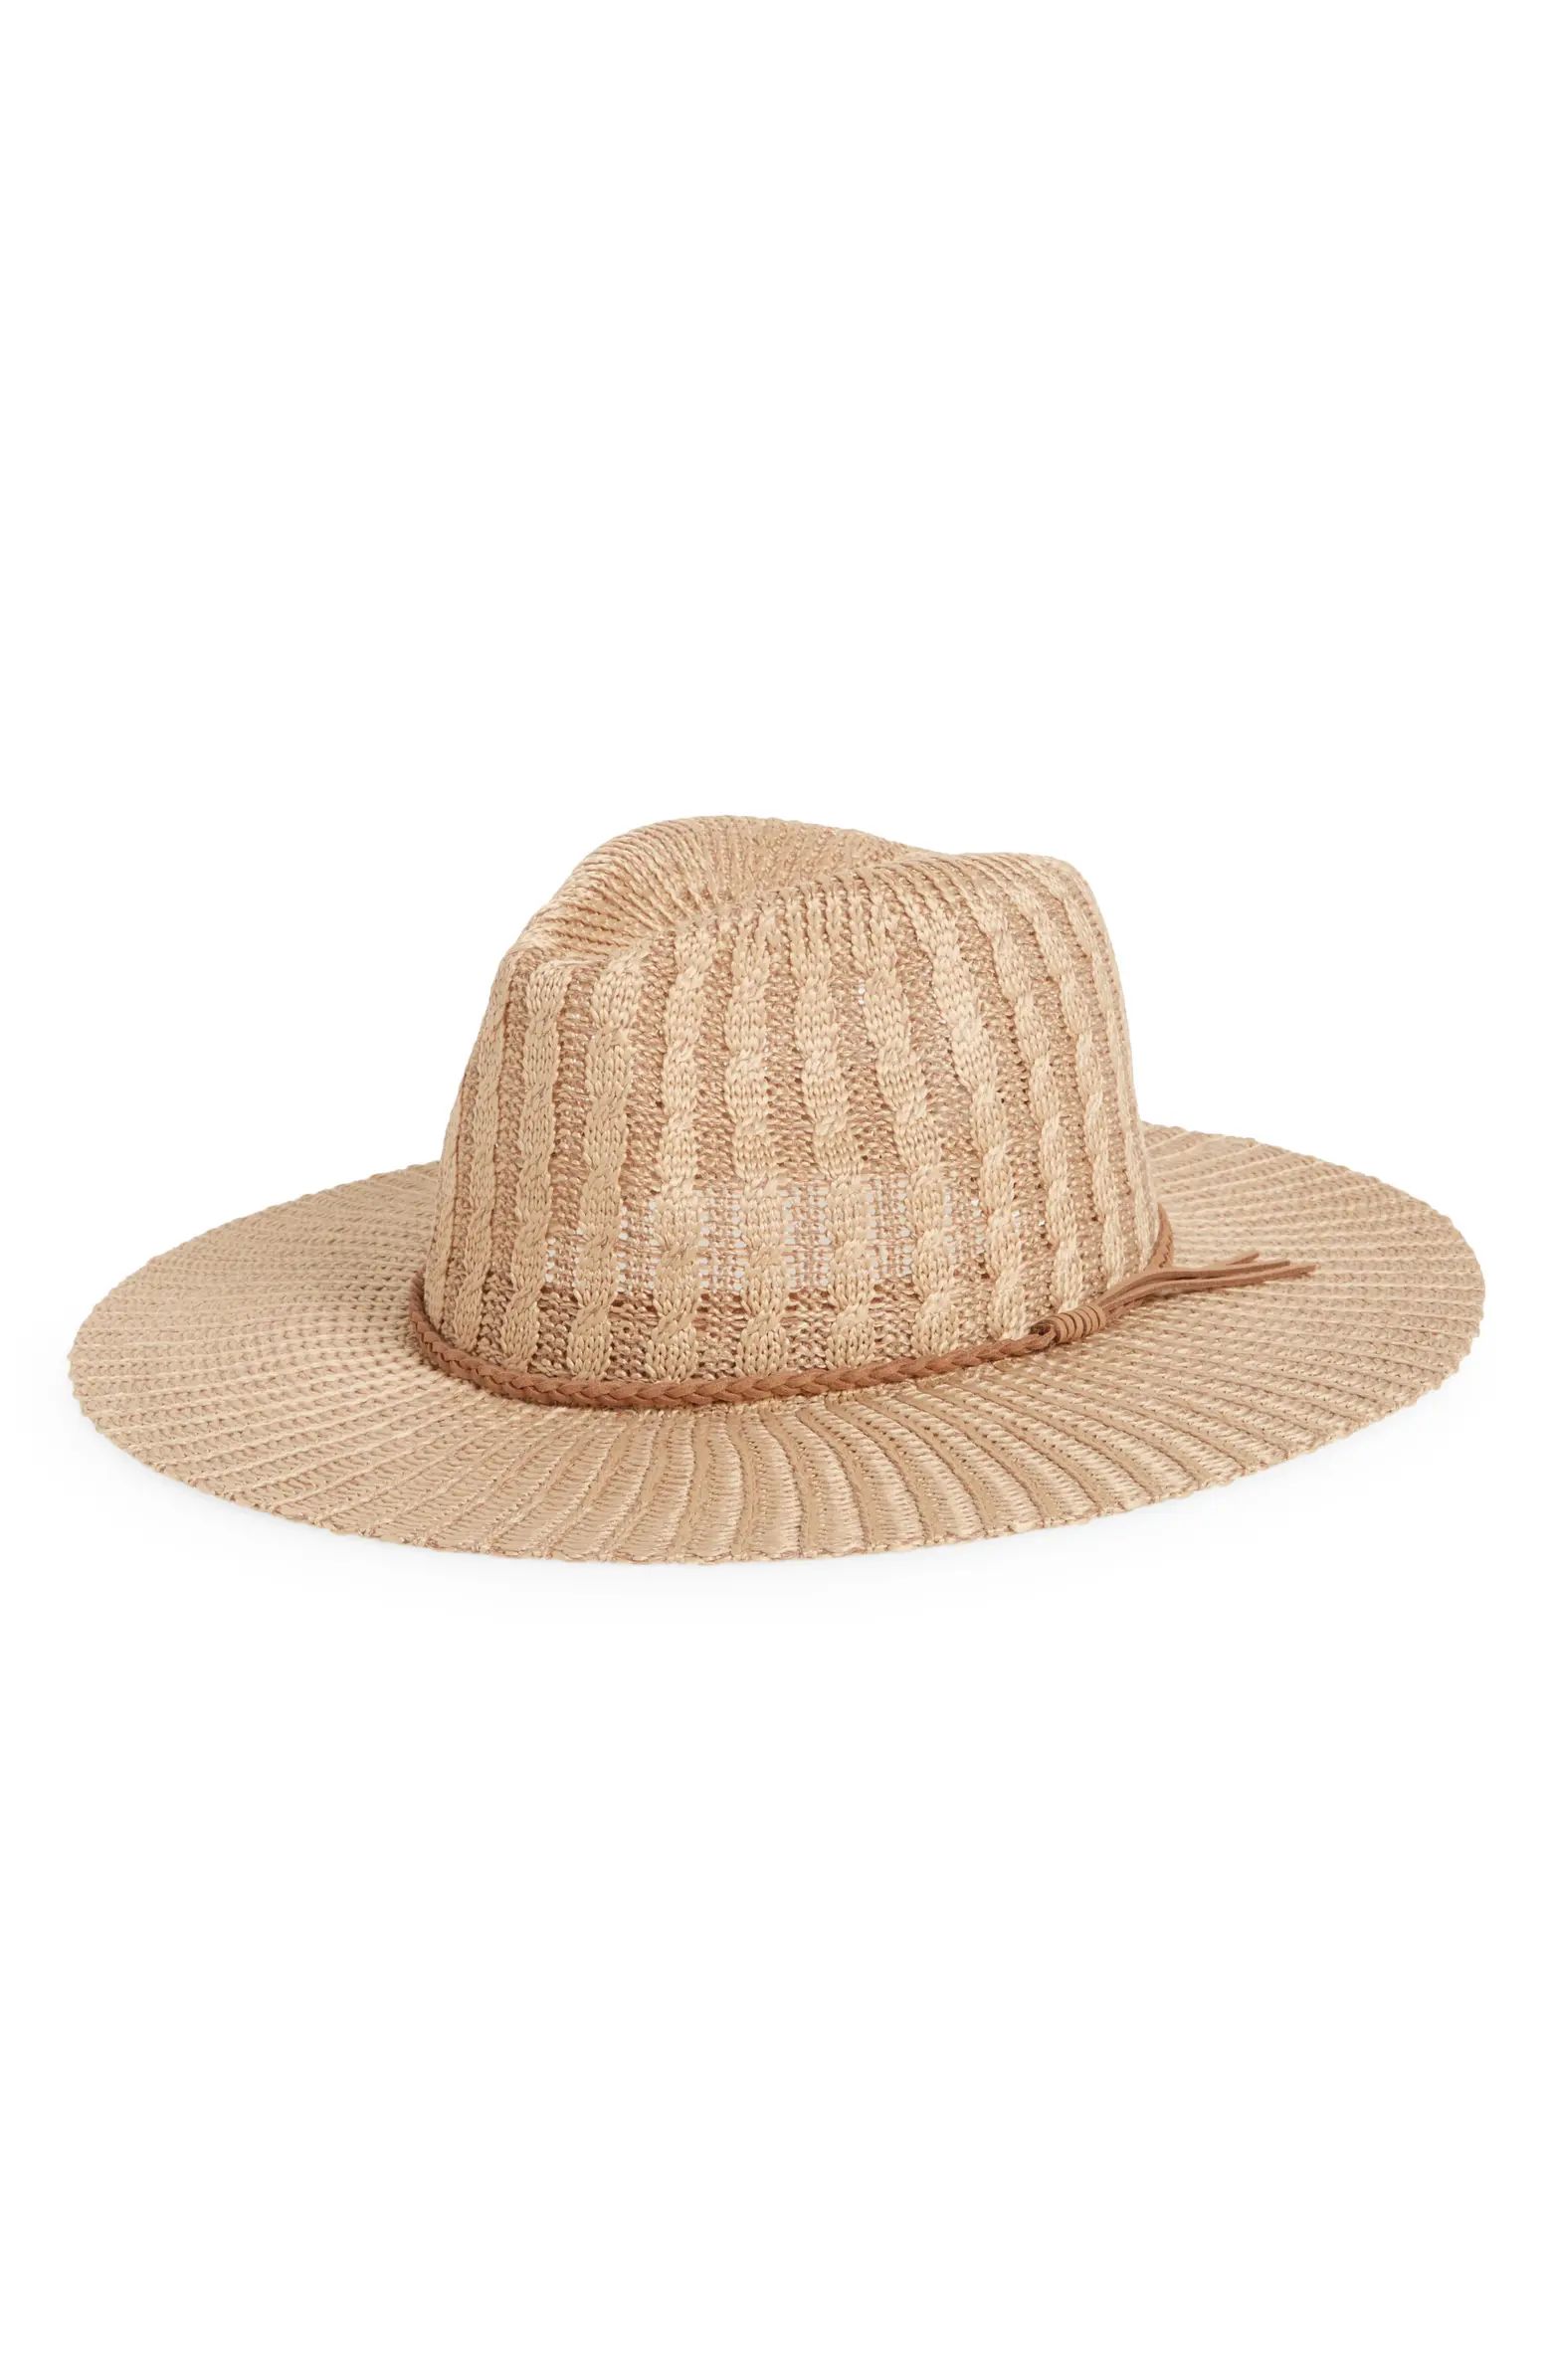 Packable Cable Weave Straw Panama Hat | Nordstrom